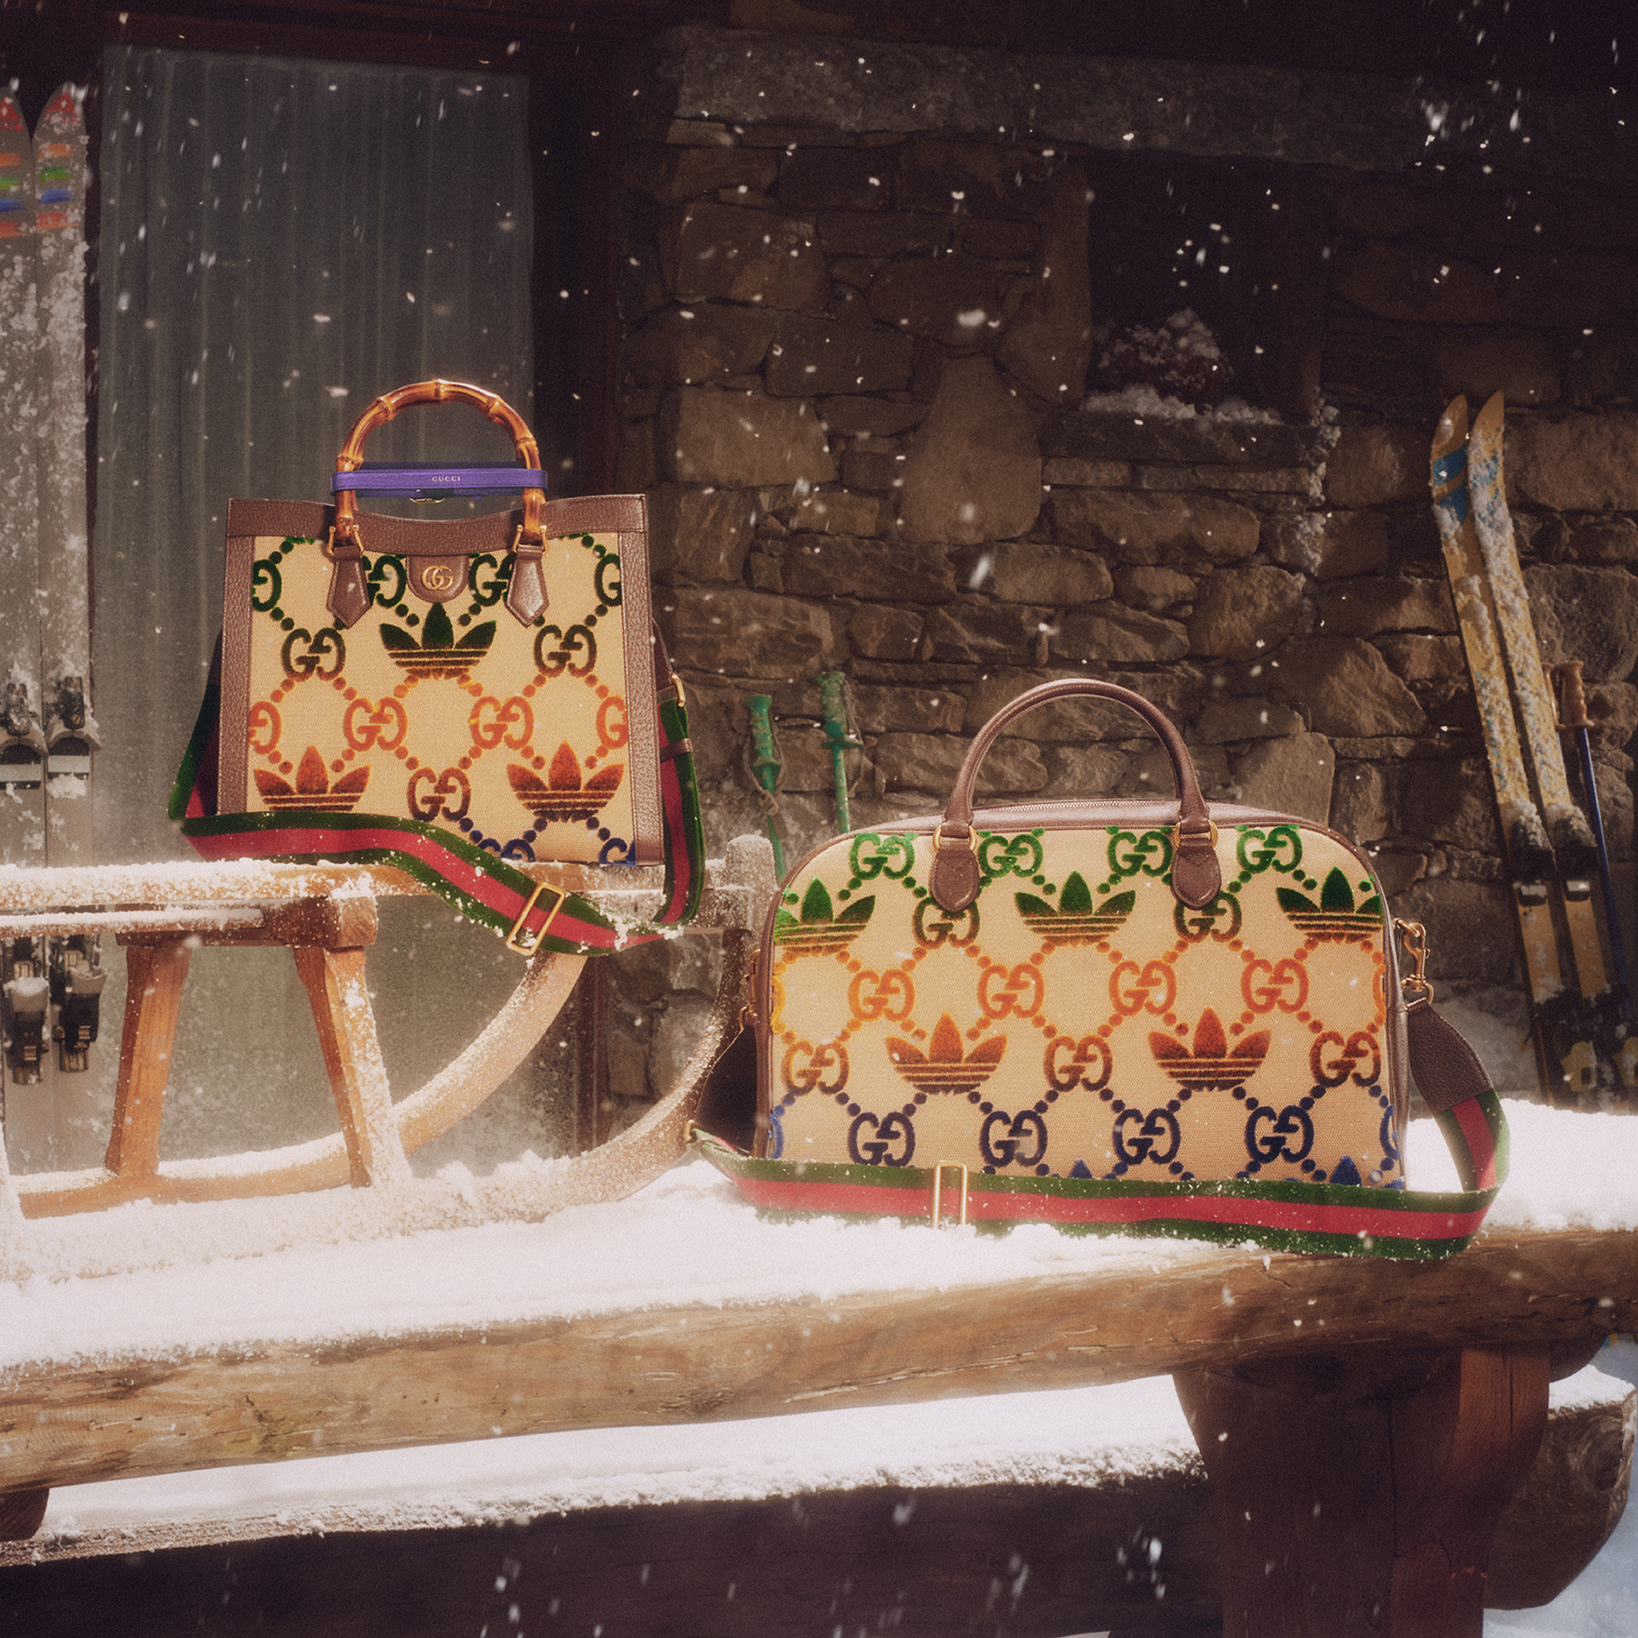 gucci X: #adidasxGucci narrative continues with a colorful and textural on the #GucciDiana and a #GucciValigeria duffle, now available in stores and online. Discover more https://t.co/TUqTp67lWd @adidasoriginals #GucciApresSki